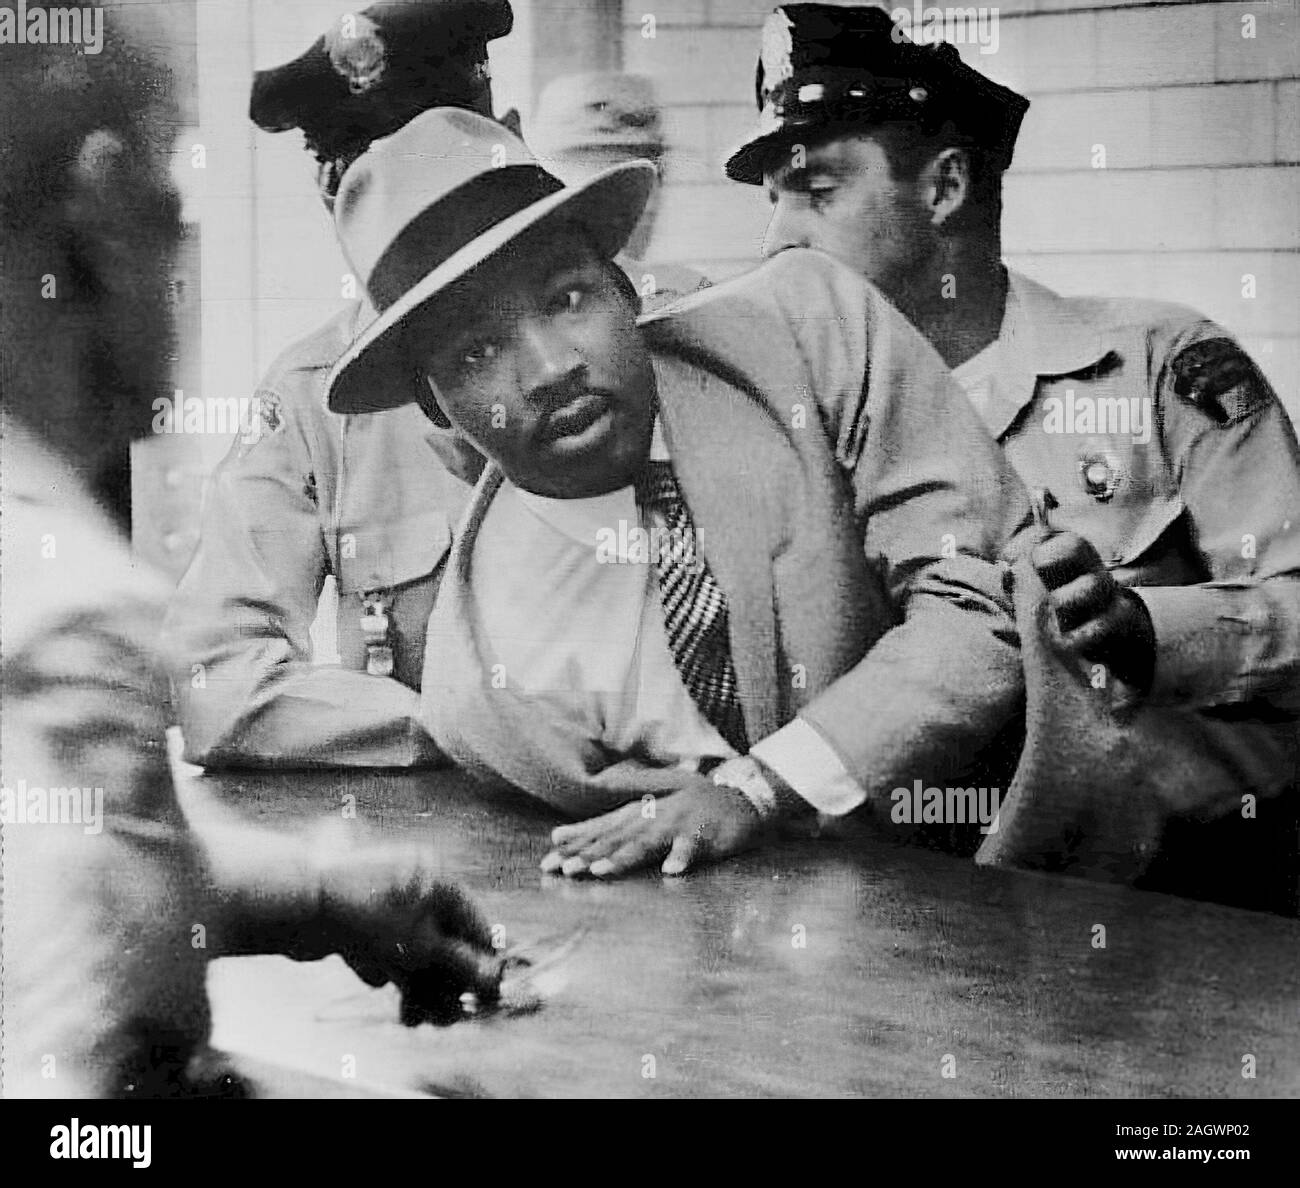 Martin Luther King Jr. arrested in Montgomery, Alabama. Martin Luther King Jr. (January 15, 1929 – April 4, 1968) was an American Christian minister and activist who became the most visible spokesperson and leader in the Civil Rights Movement from 1955 until his assassination in 1968. Born in Atlanta, Georgia, King is best known for advancing civil rights through nonviolence and civil disobedience, inspired by his Christian beliefs and the nonviolent activism of Mahatma Gandhi. Stock Photo